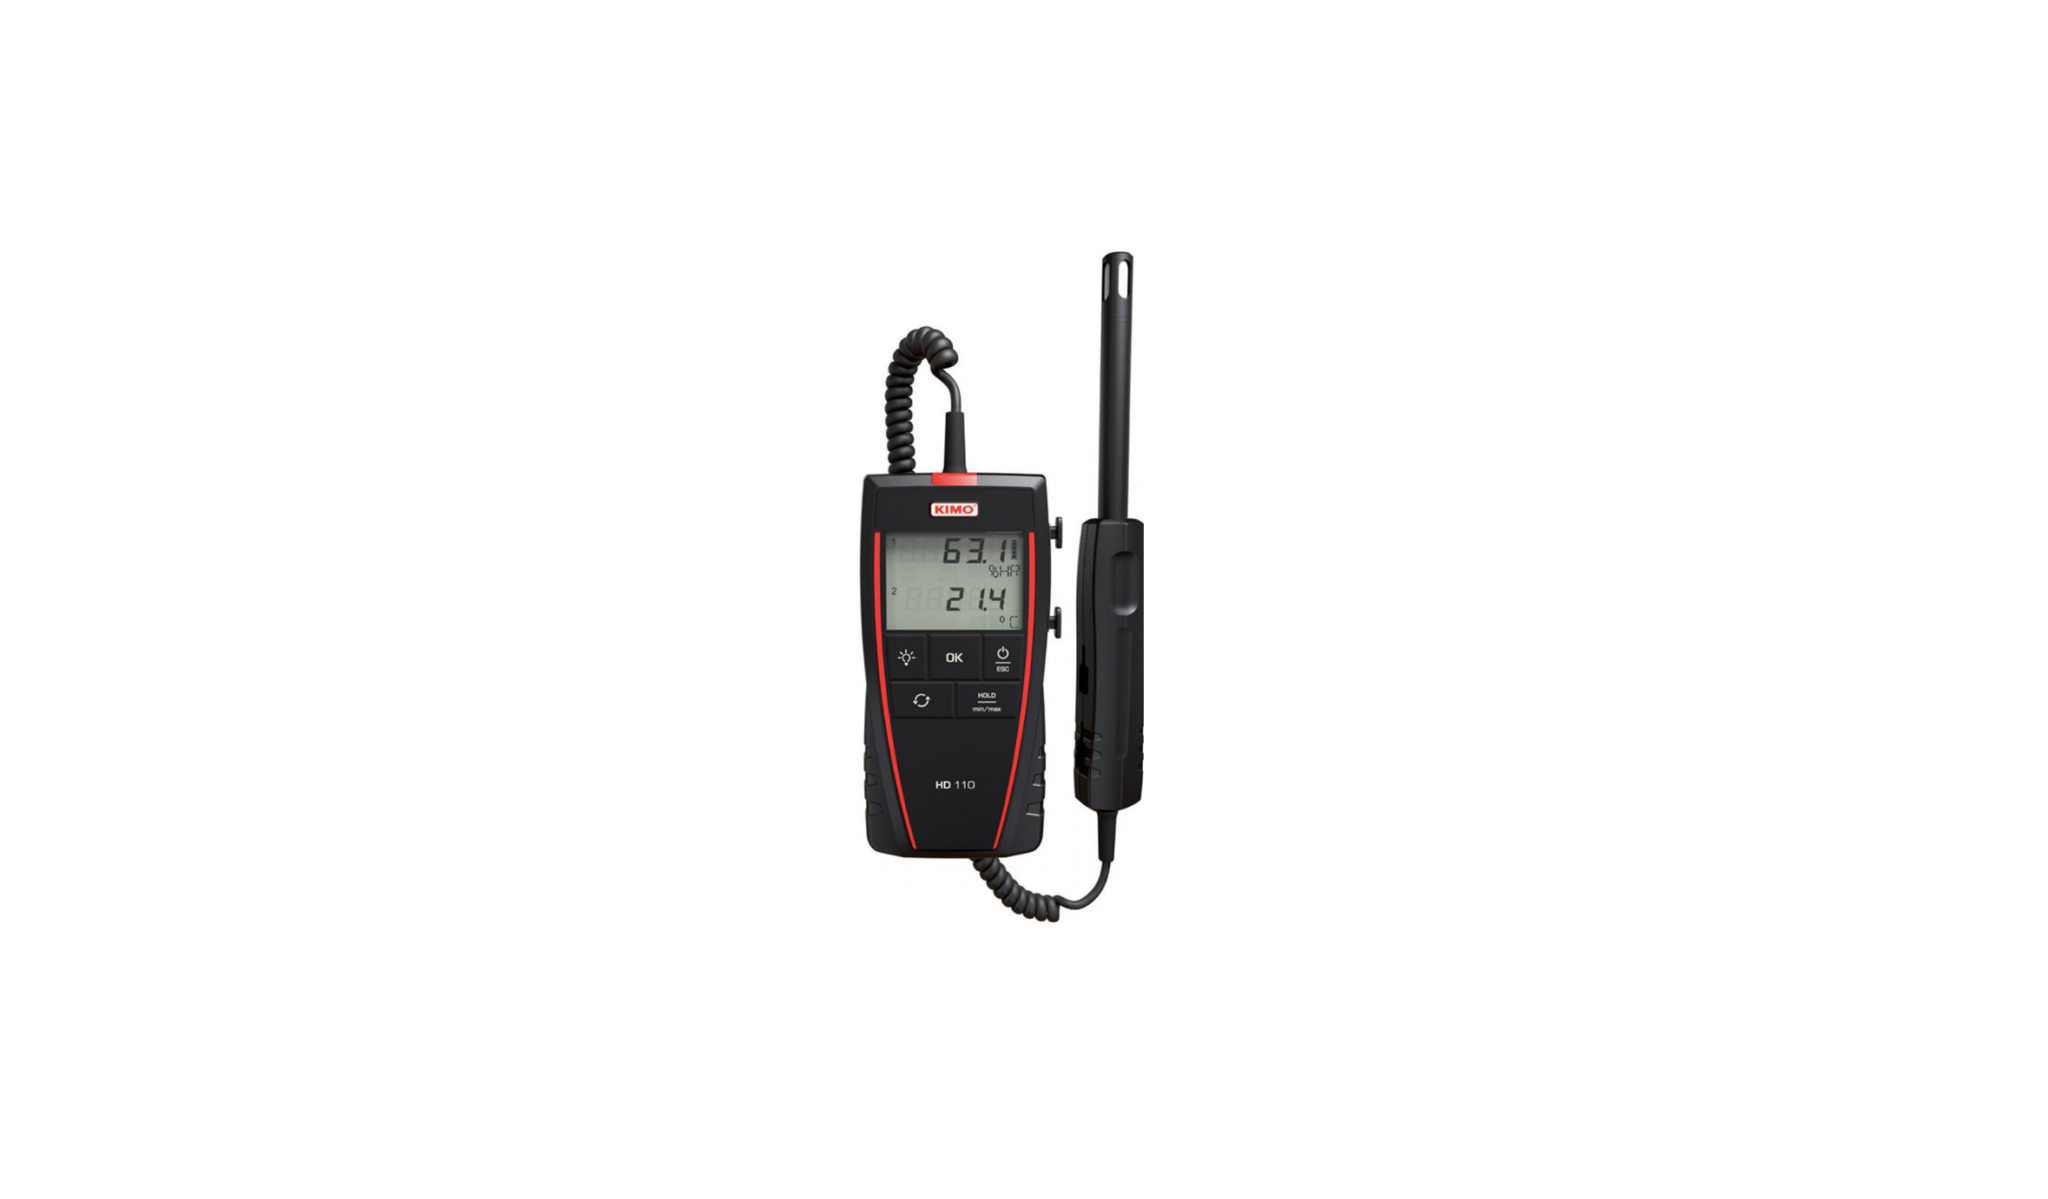 HD 110 Thermo Hygrometer